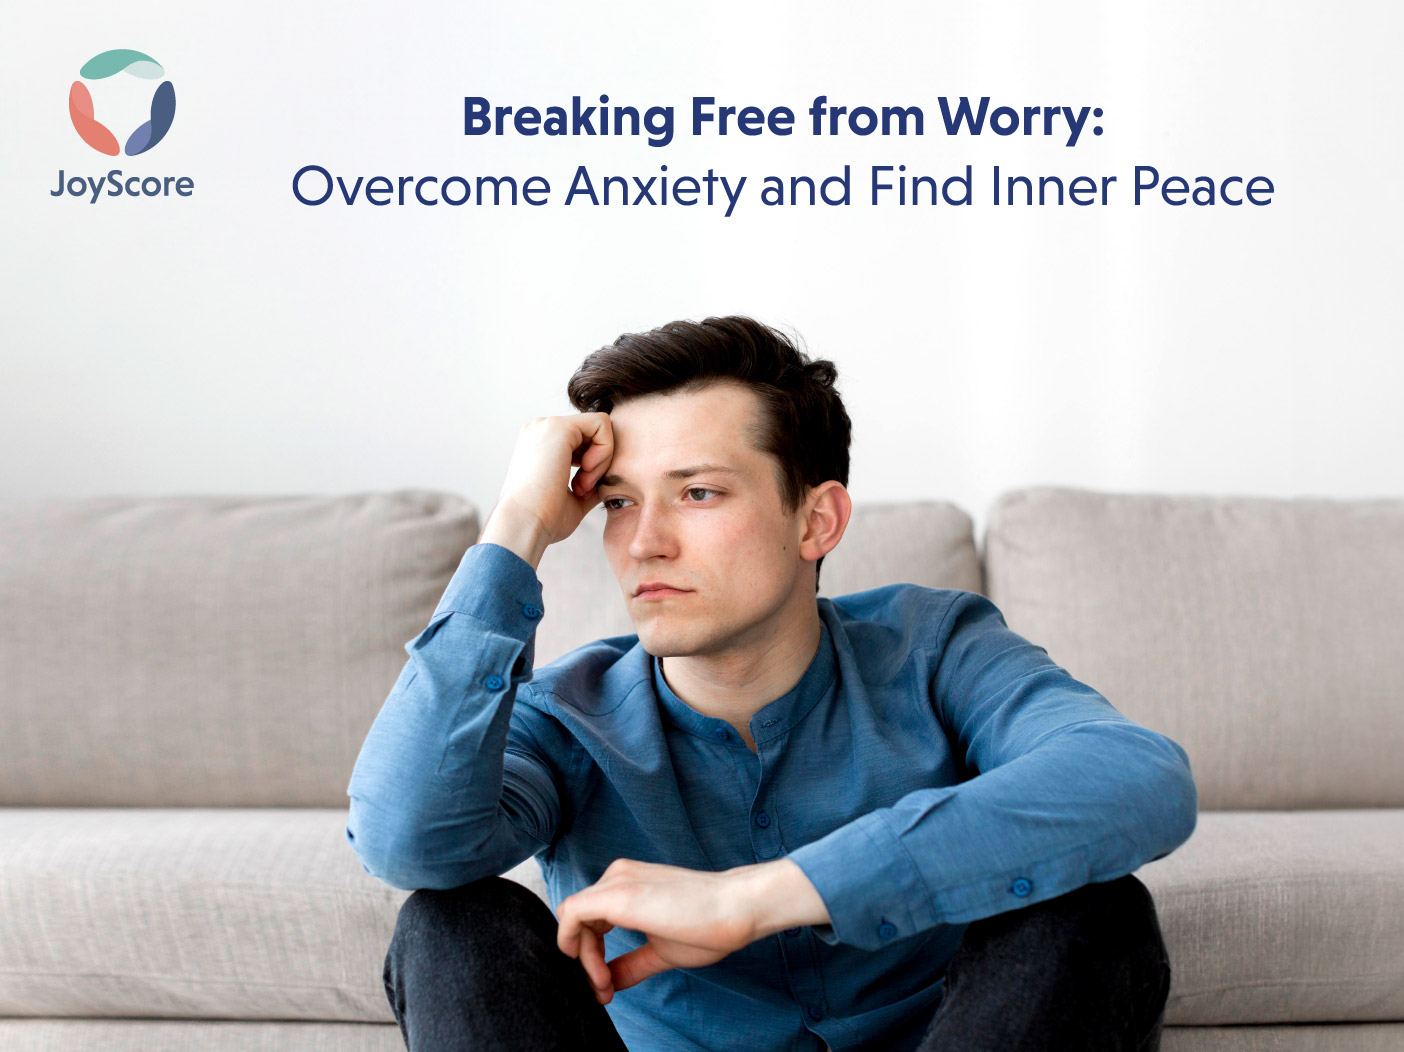 Breaking Free From Worry: Tips to Overcome Anxiety and Find Inner Peace